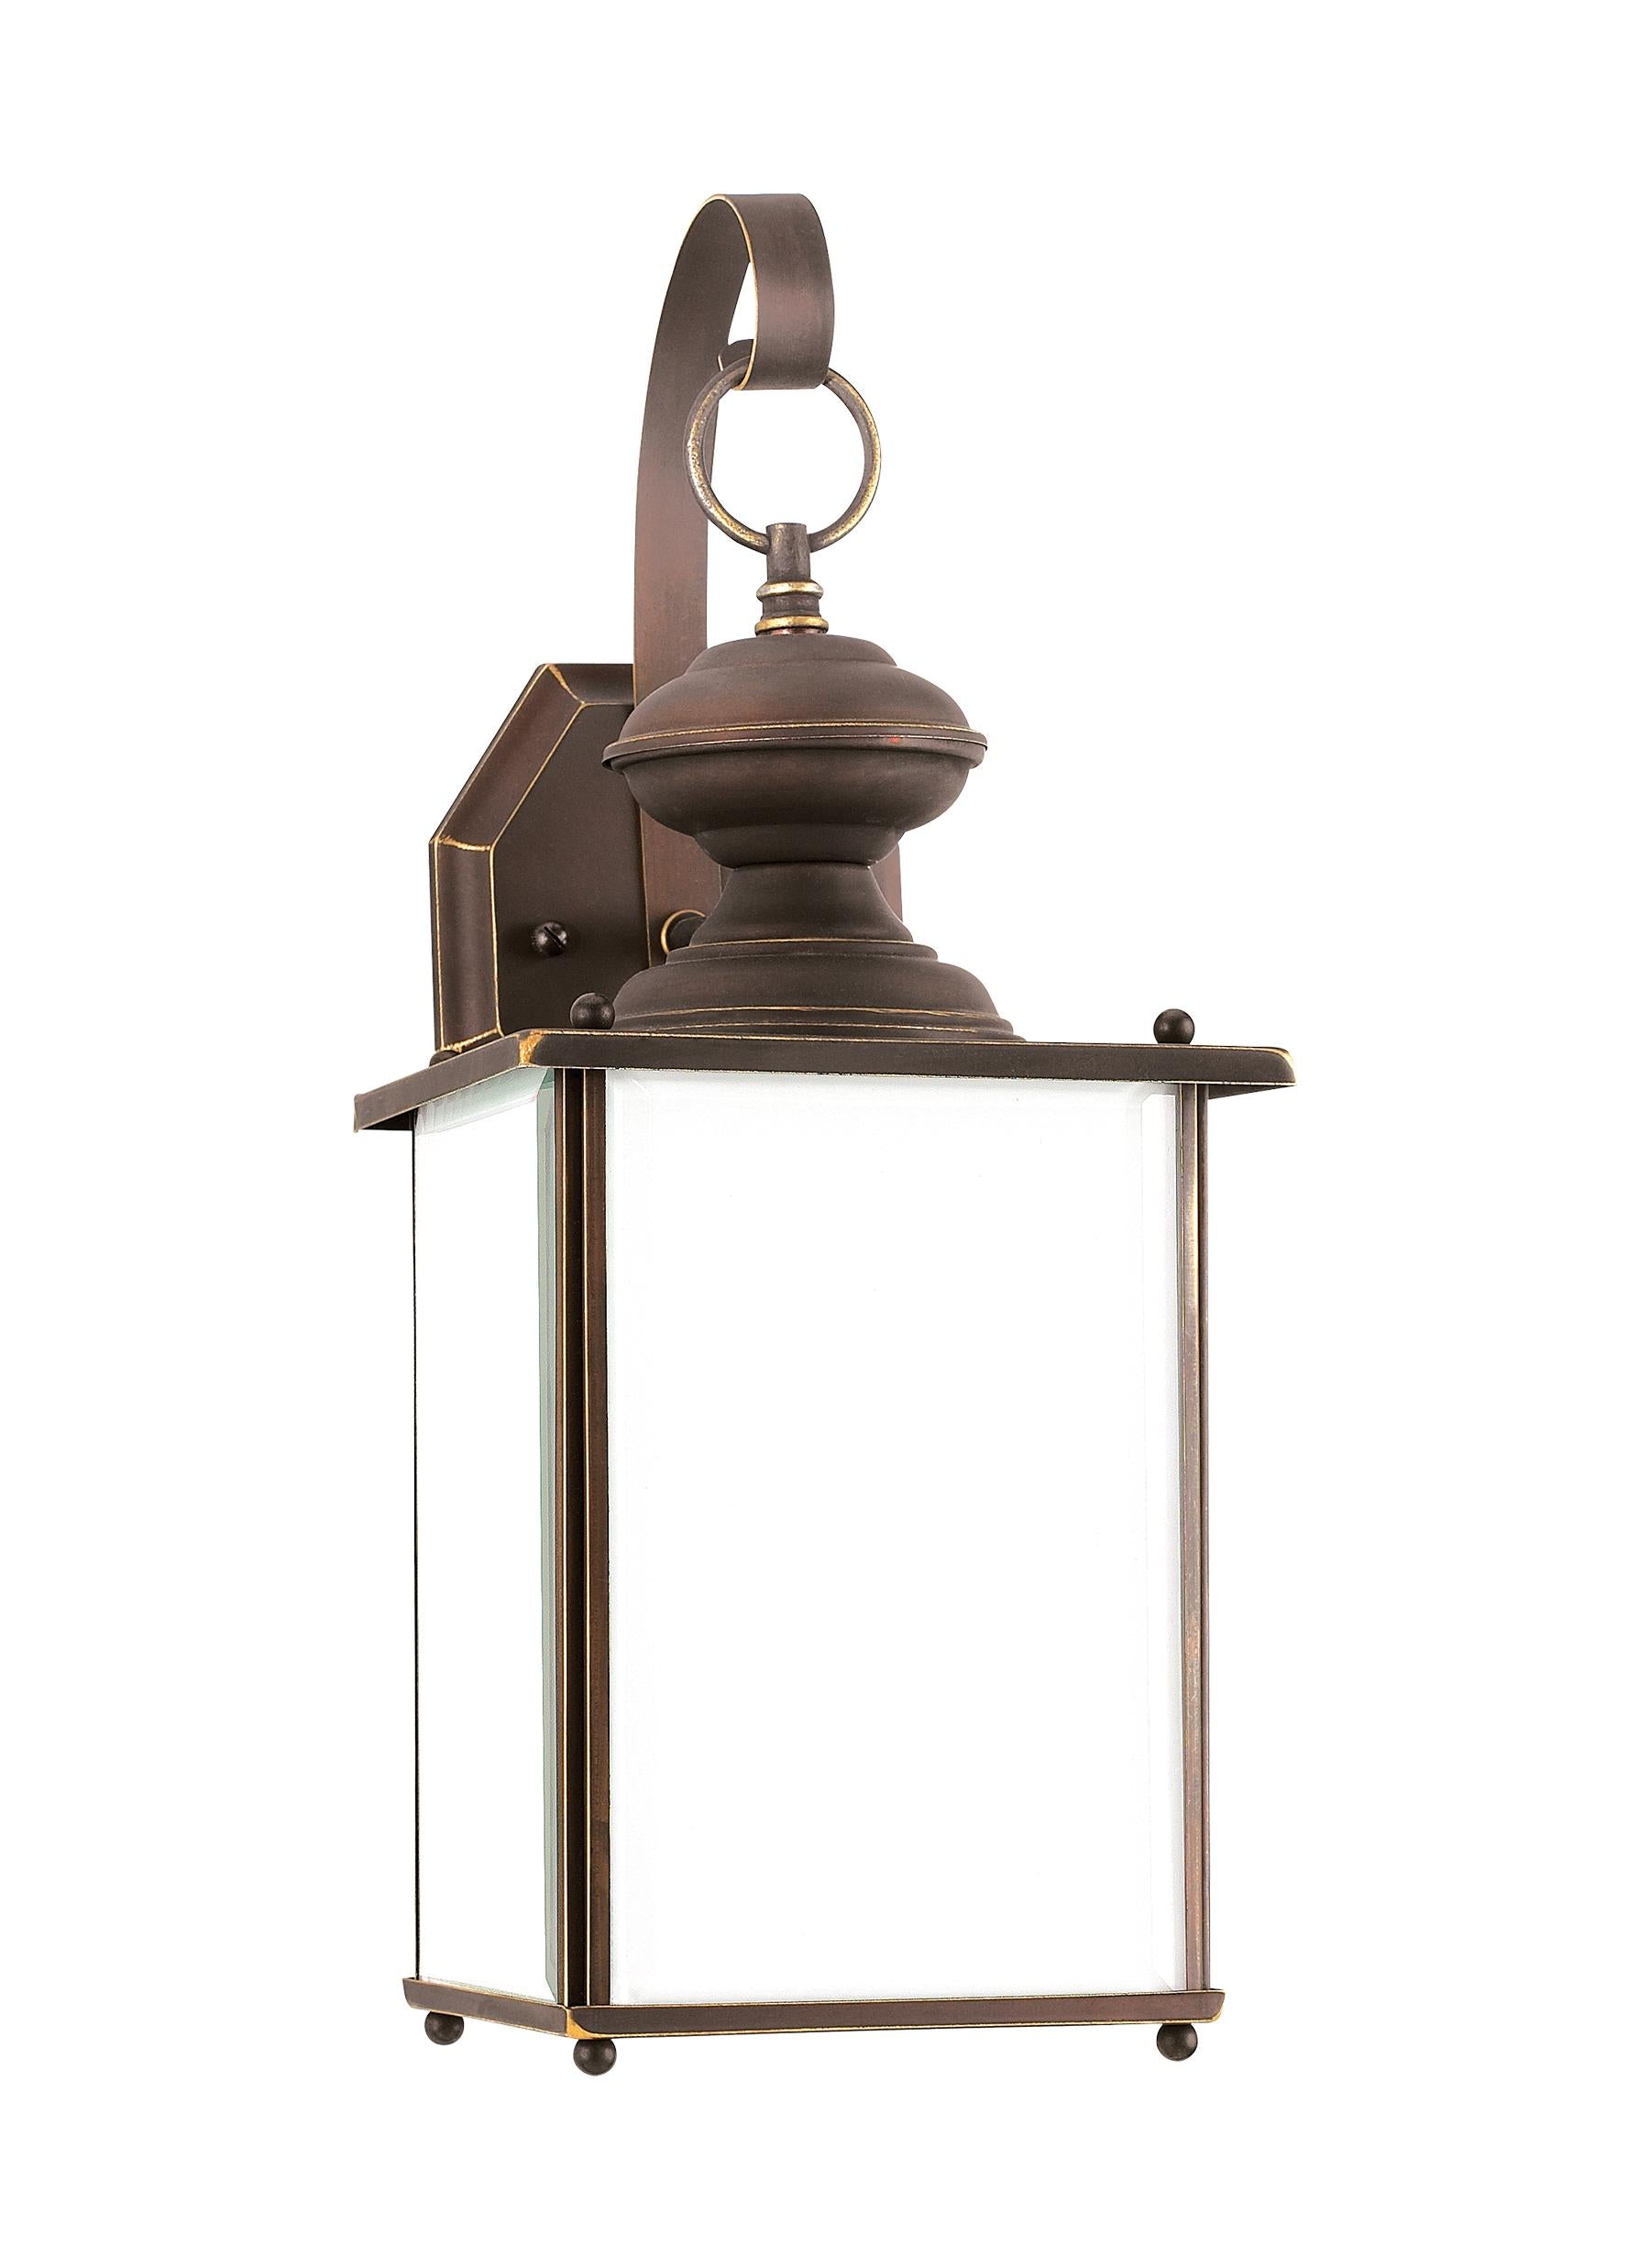 Jamestowne transitional 1-light large outdoor exterior Dark Sky compliant wall lantern sconce in antique bronze finish wit...